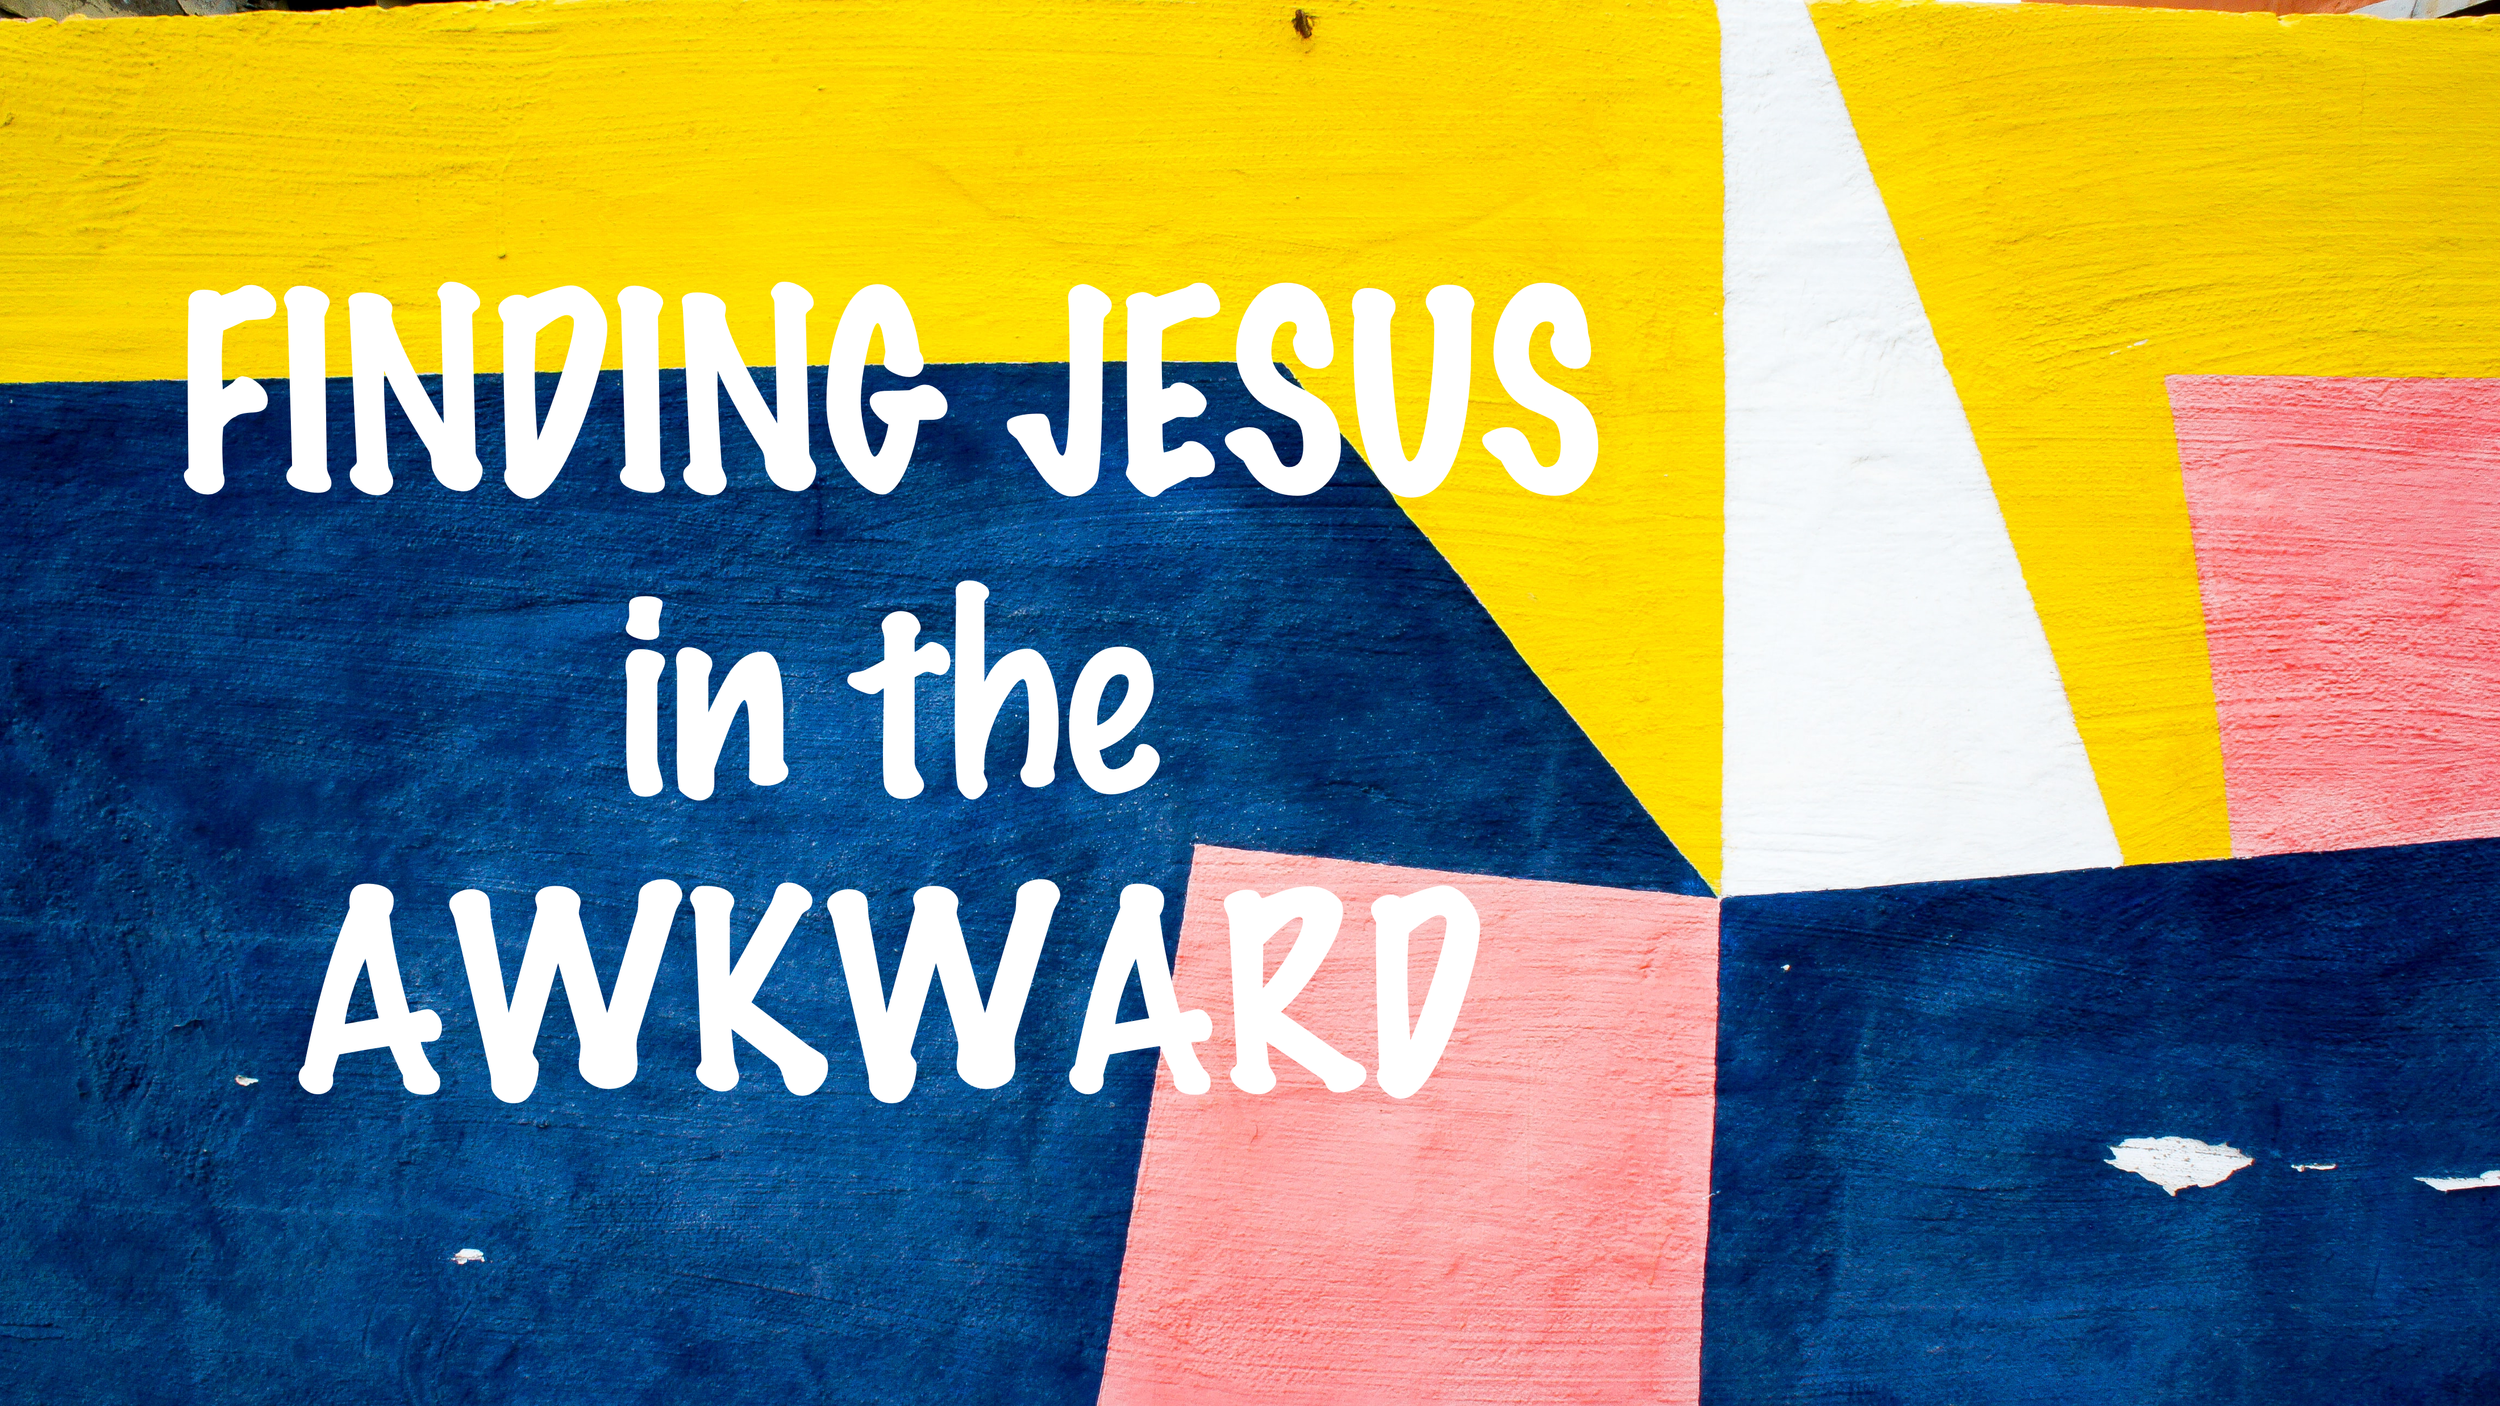 Finding Jesus in the Awkward